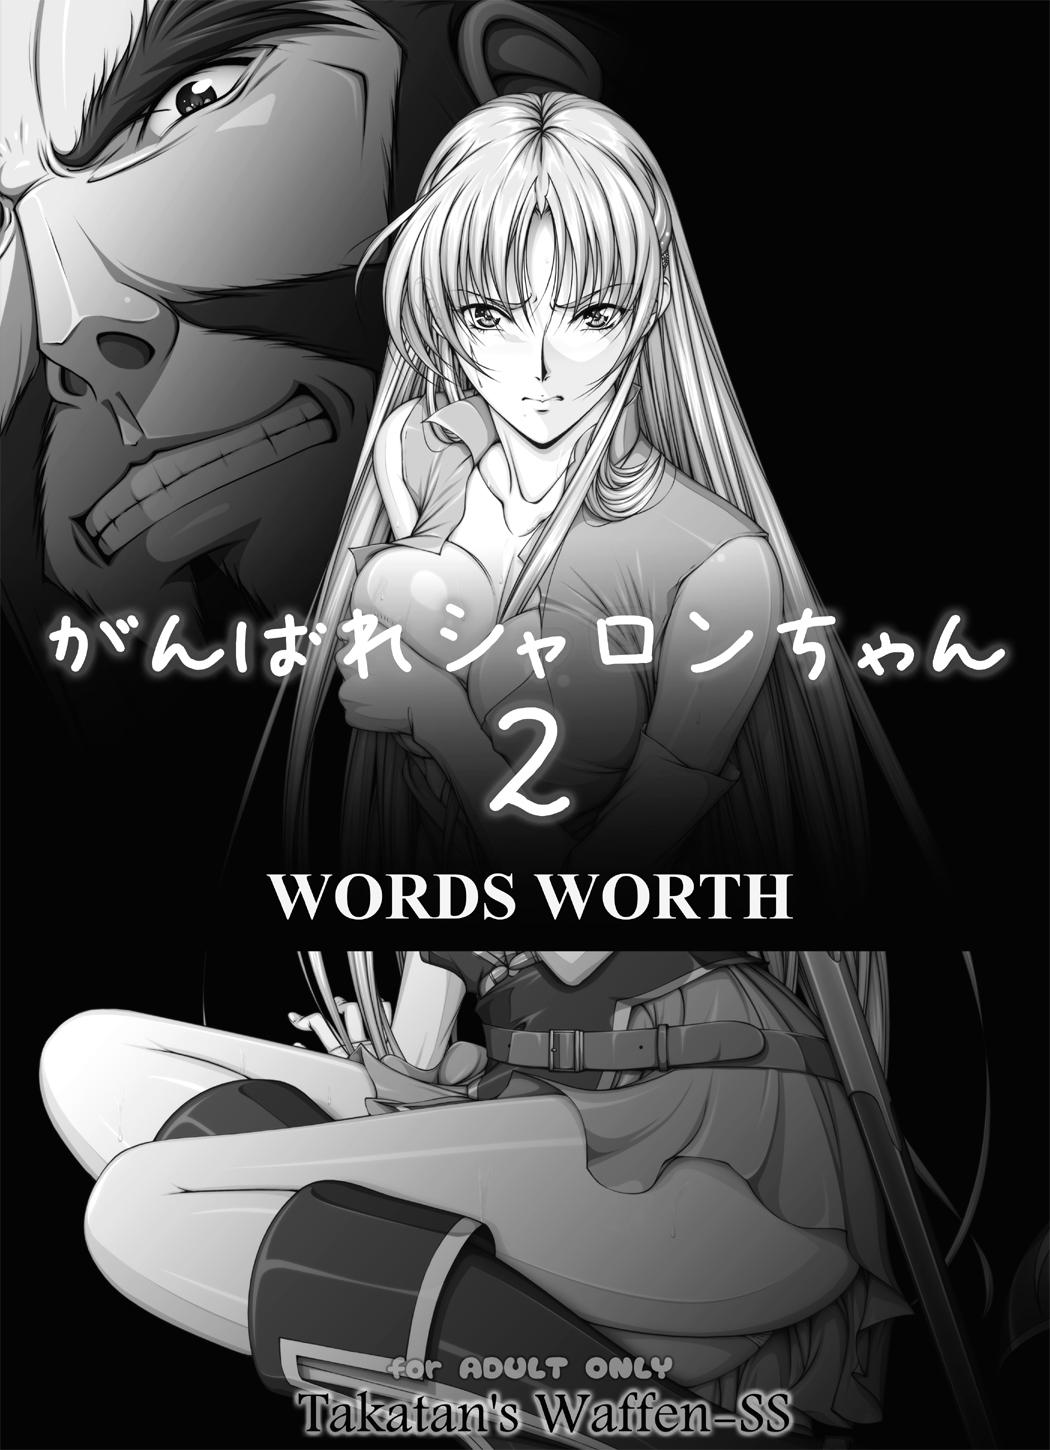 Asses [Takatan's Waffen-SS] Fight, Sharon! 2 [Deluxe Edition] (Words Worth) +omake - Words worth Amateur Porn - Page 8